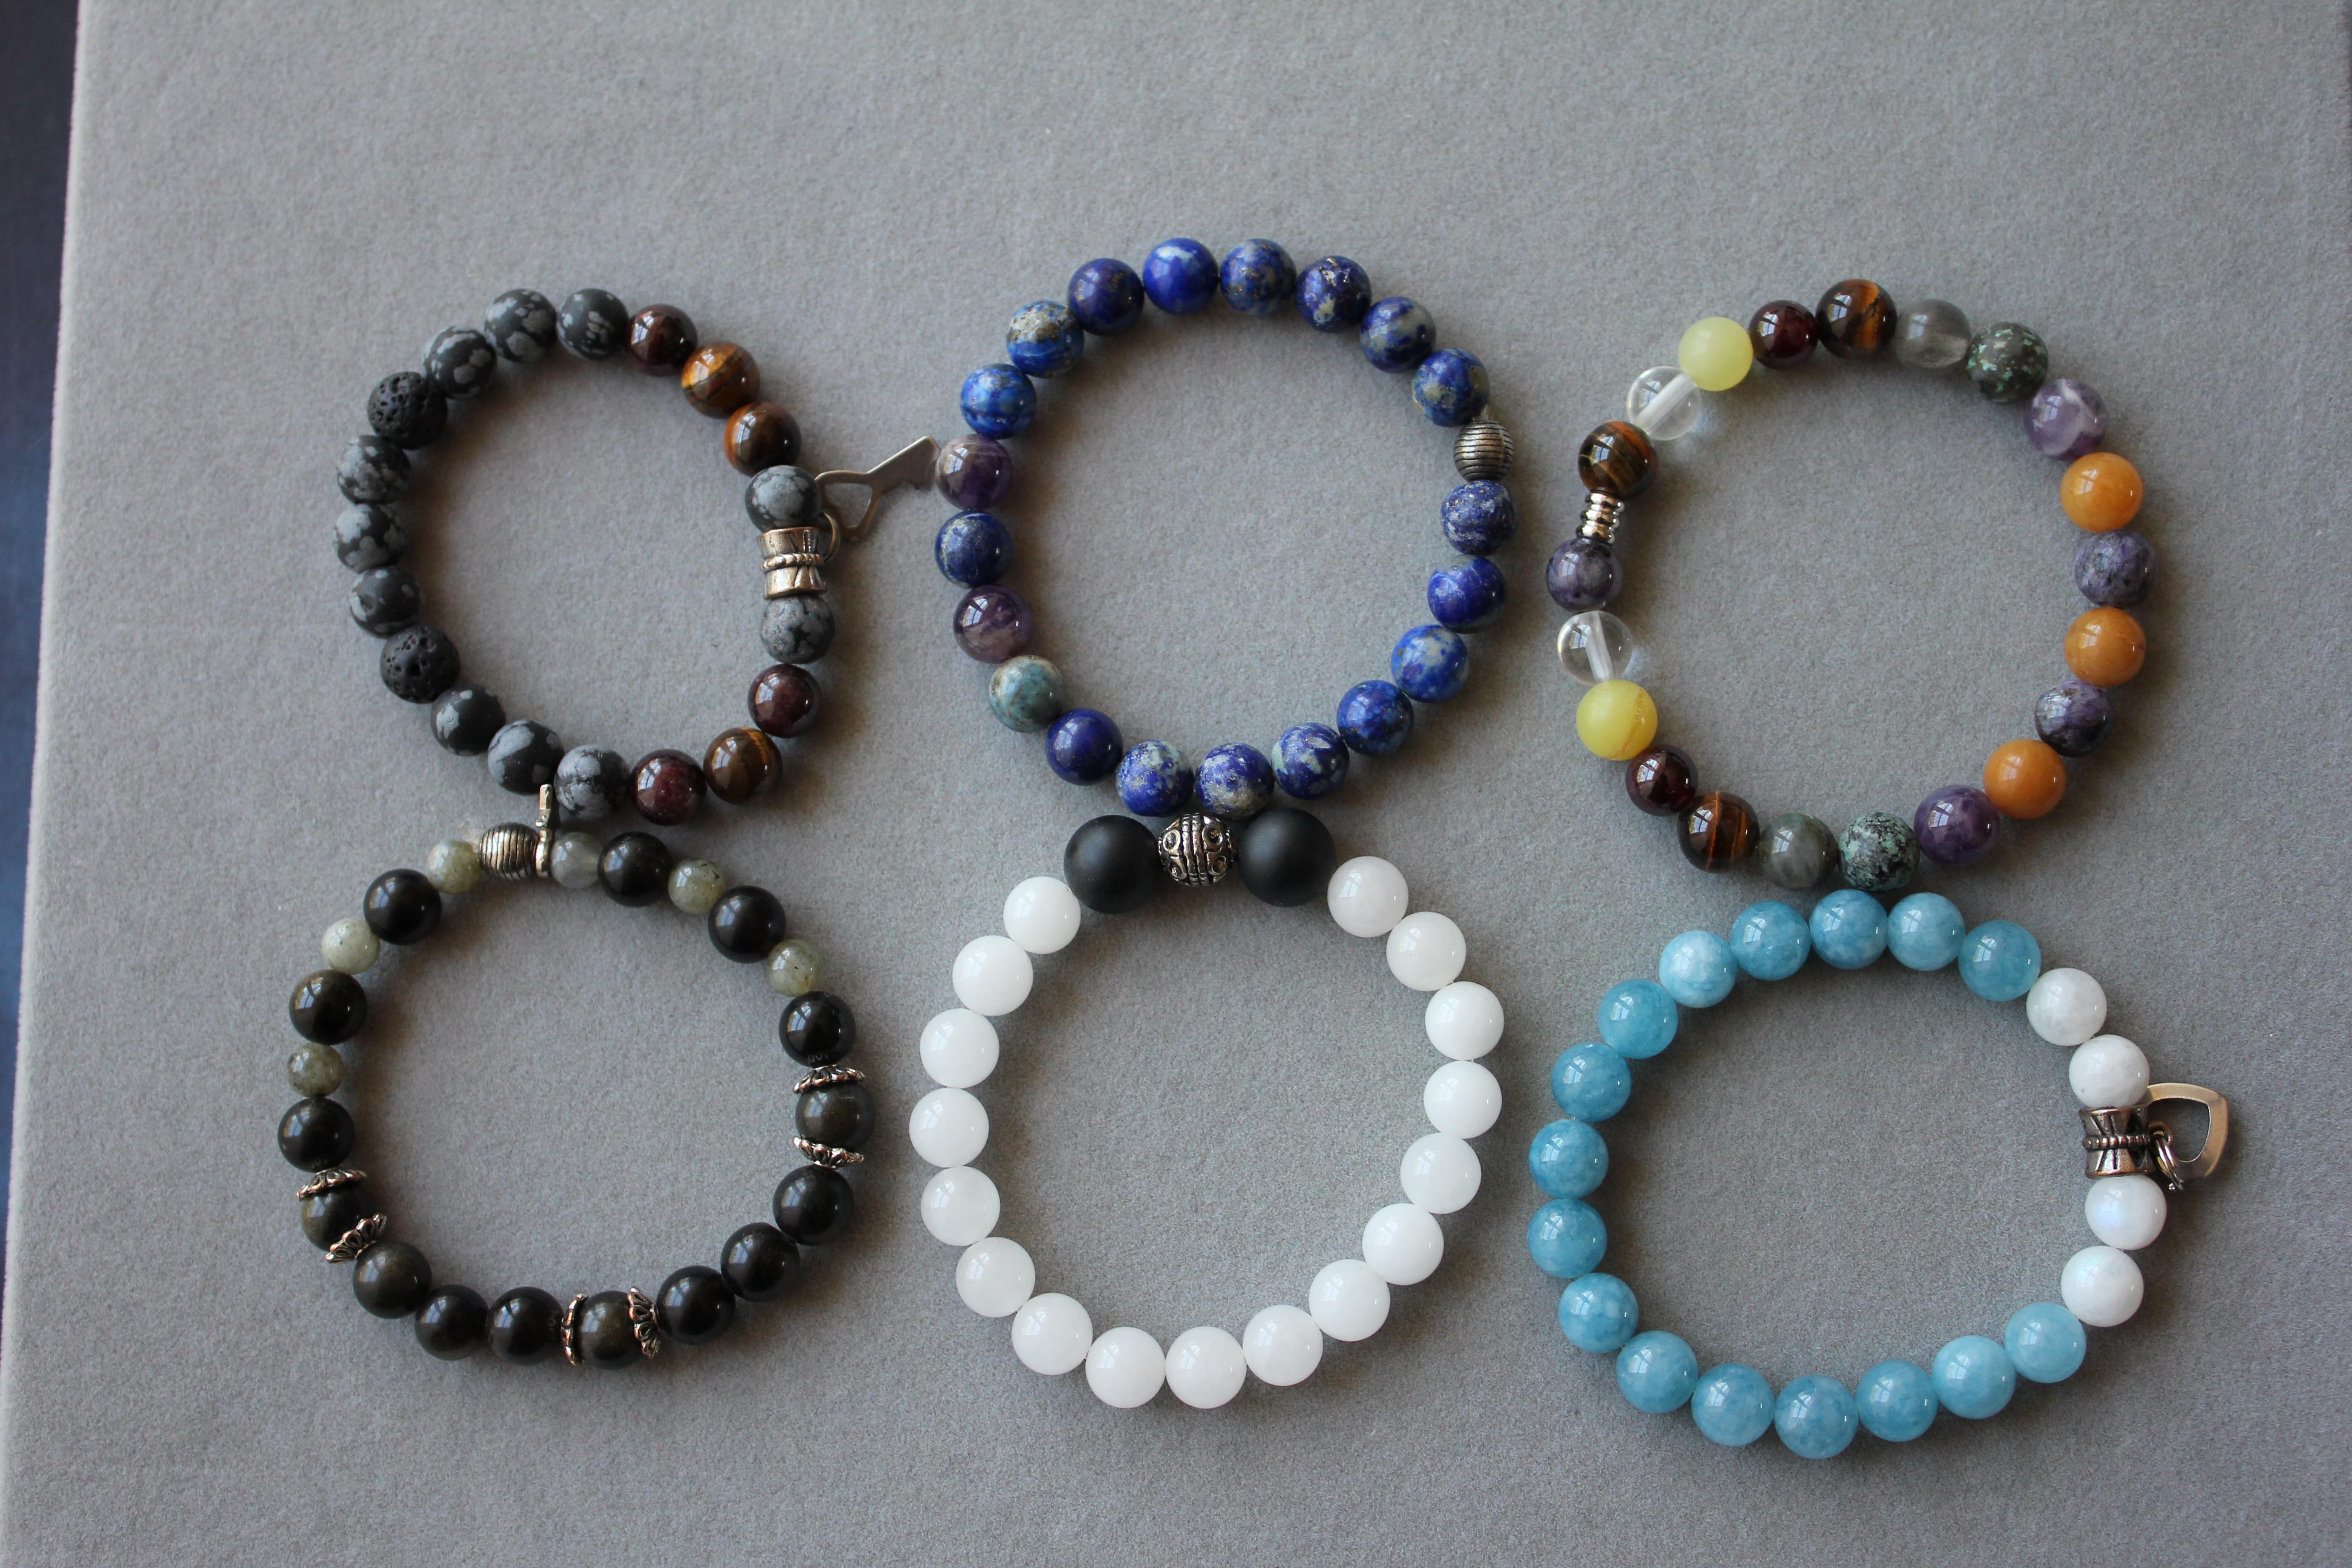 Women's or Men's Black Agate Earth Gemstone Round Chakra Beads Stretchy Unique Statement Bracelet For Sale